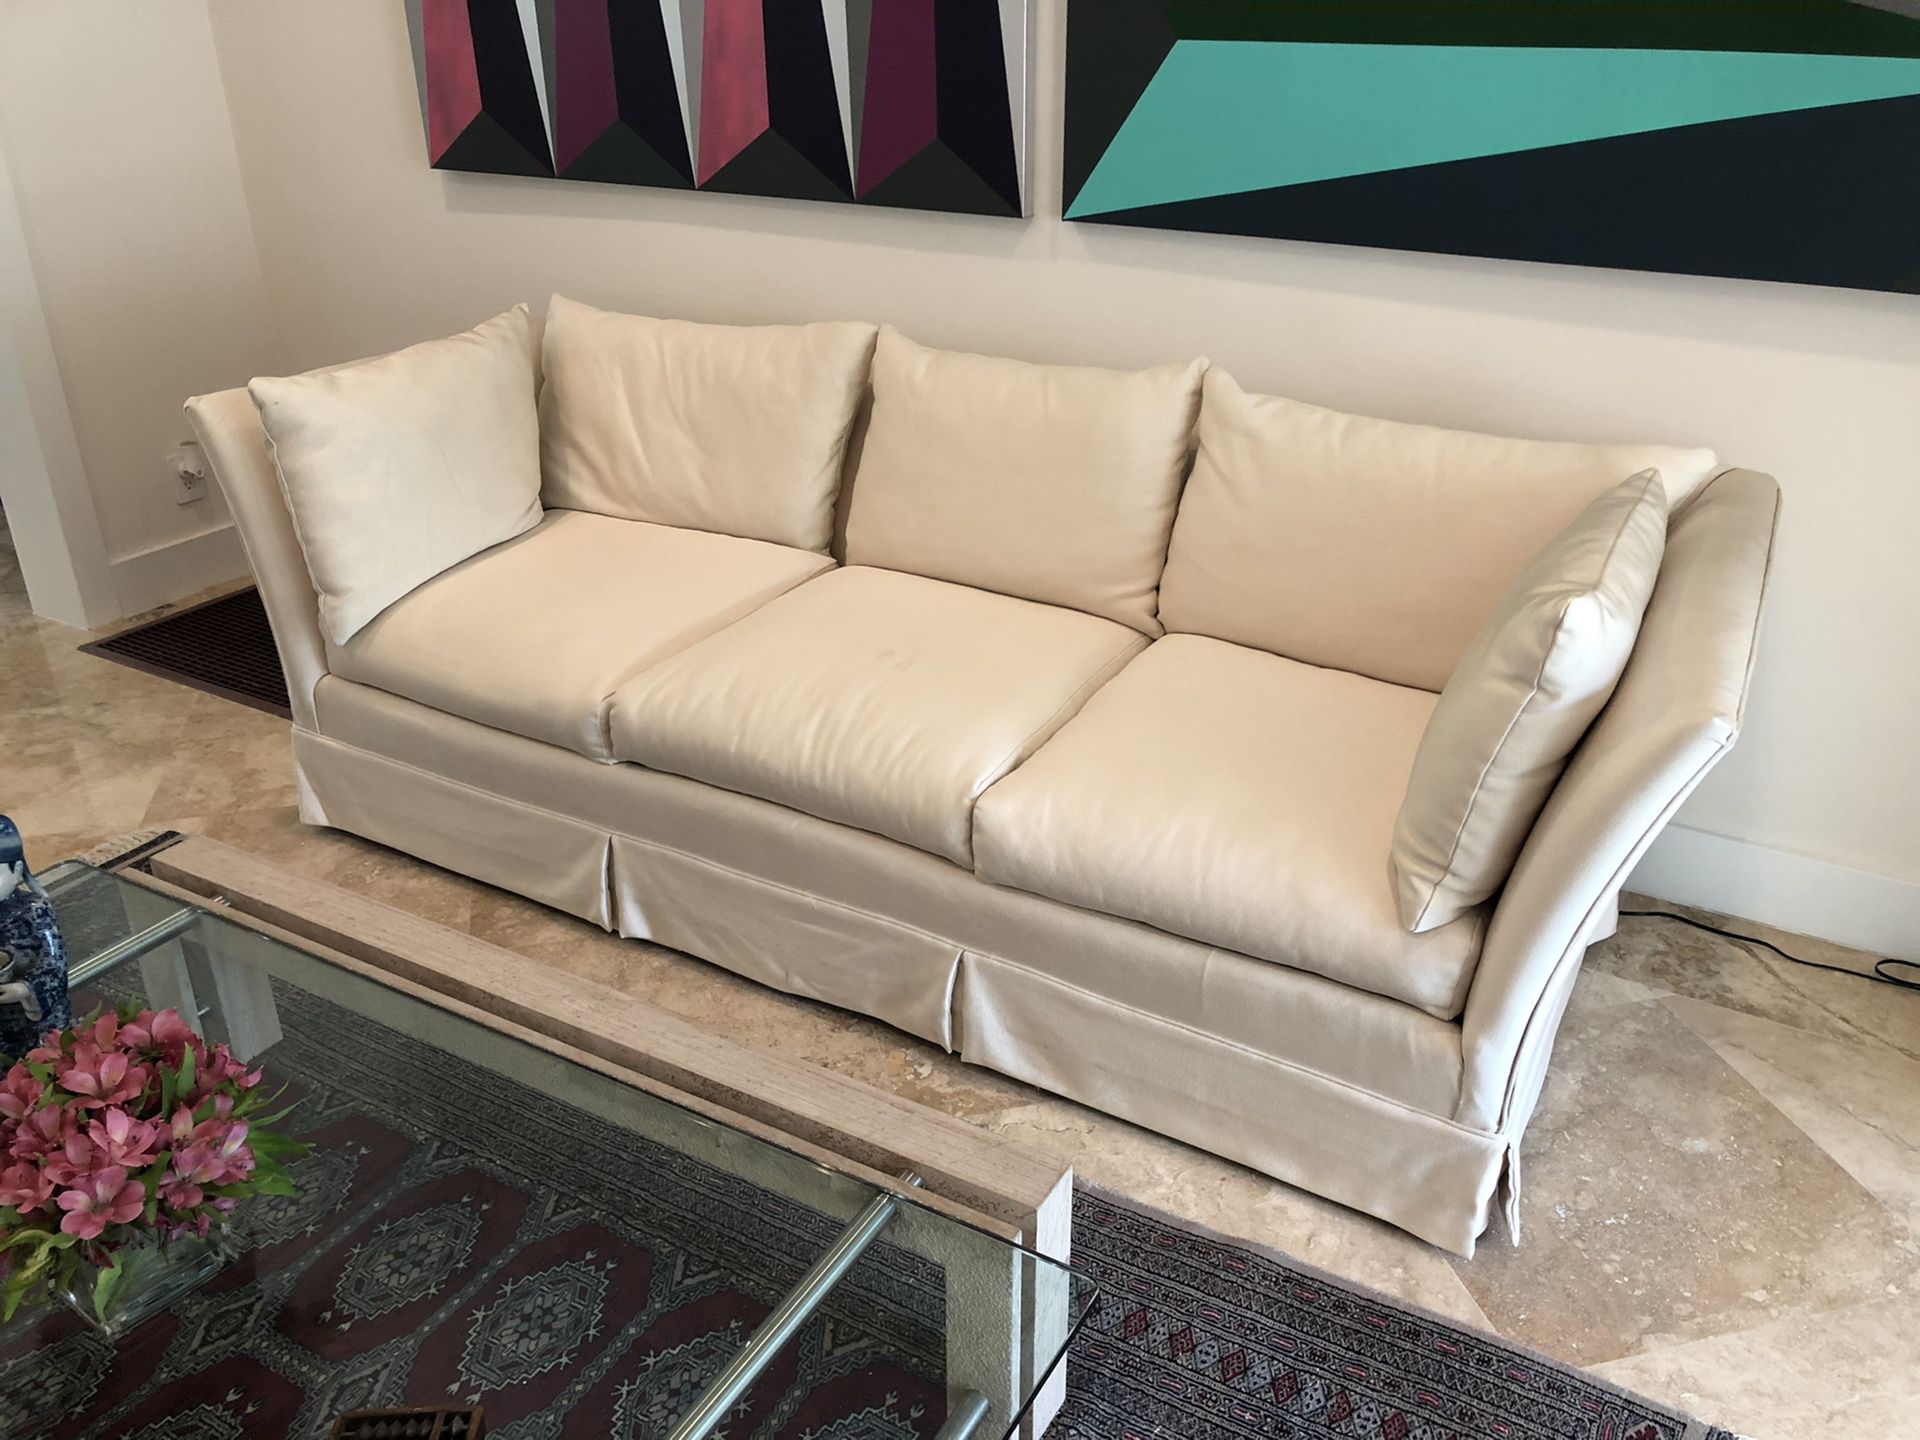 Newly reupholstered formal Sofa and Love seat